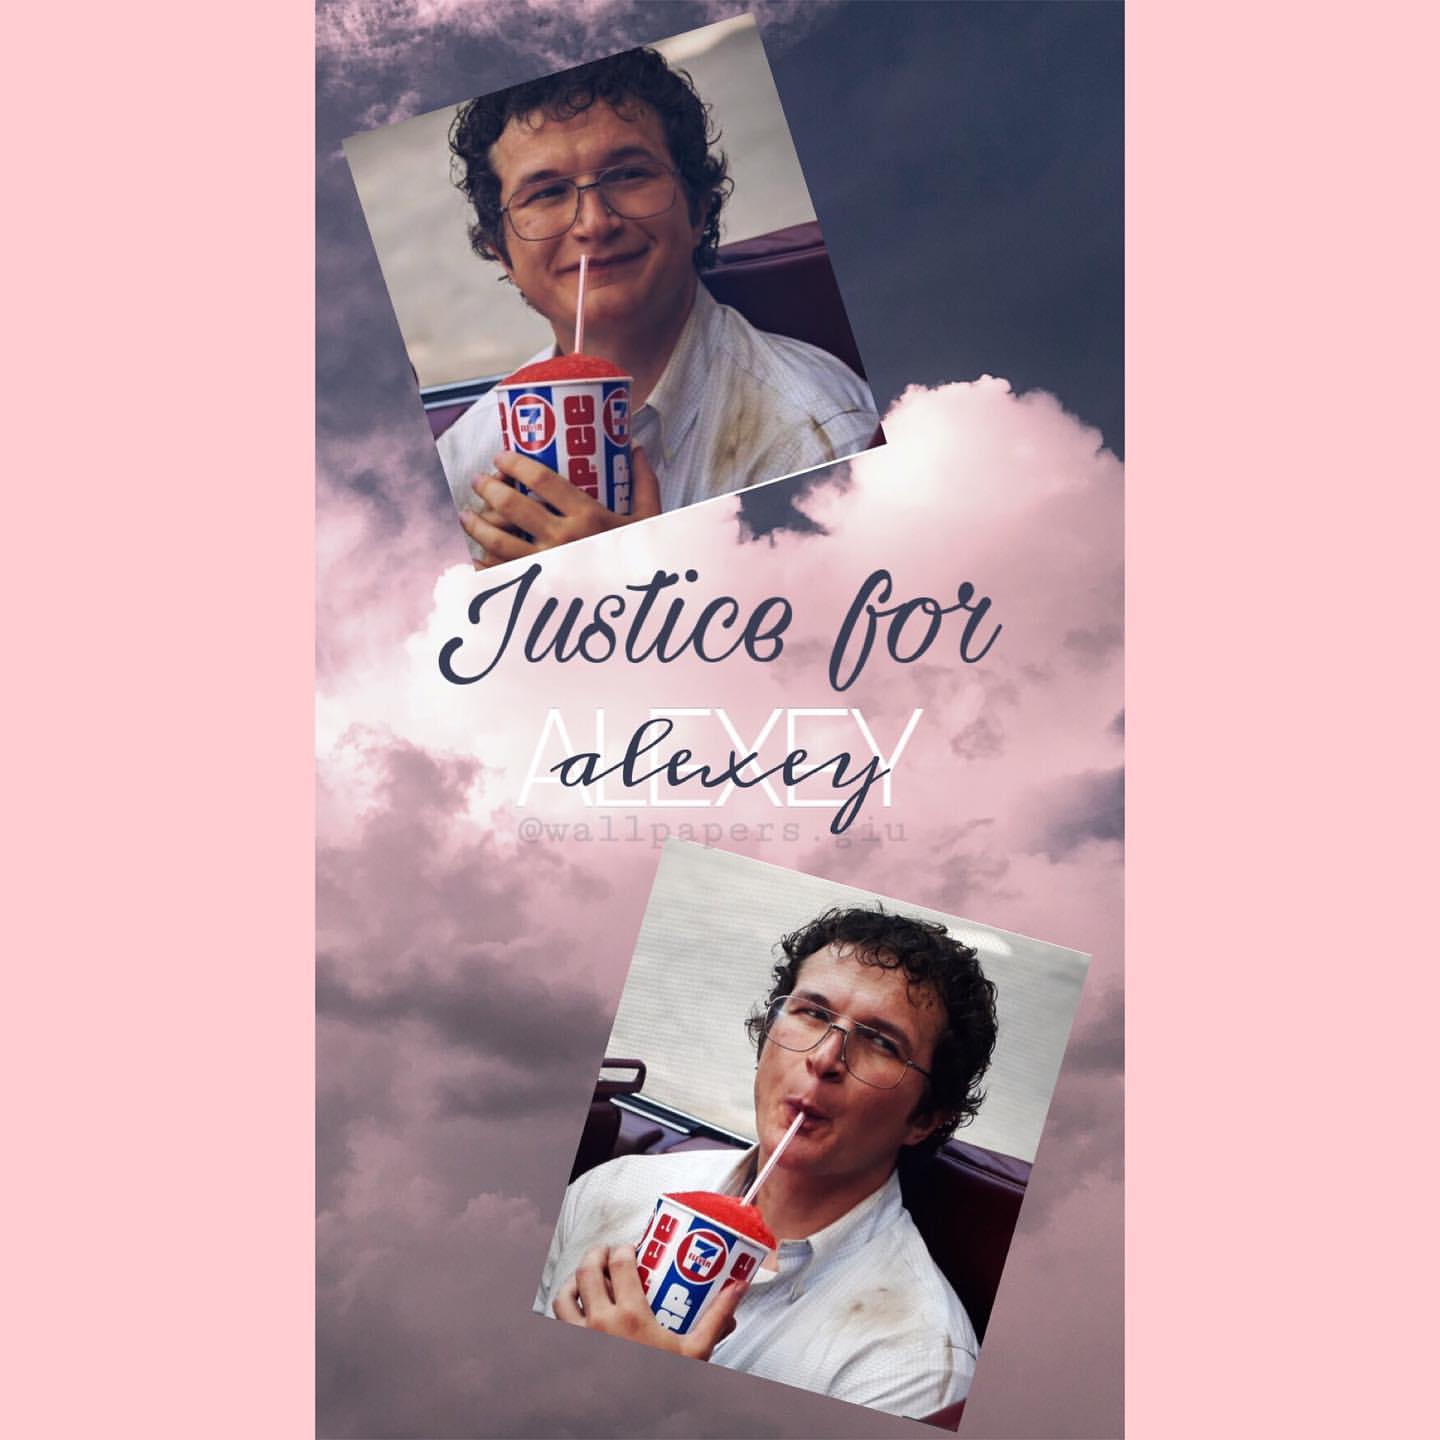 Alexei Stranger Things Wallpapers - Wallpaper Cave